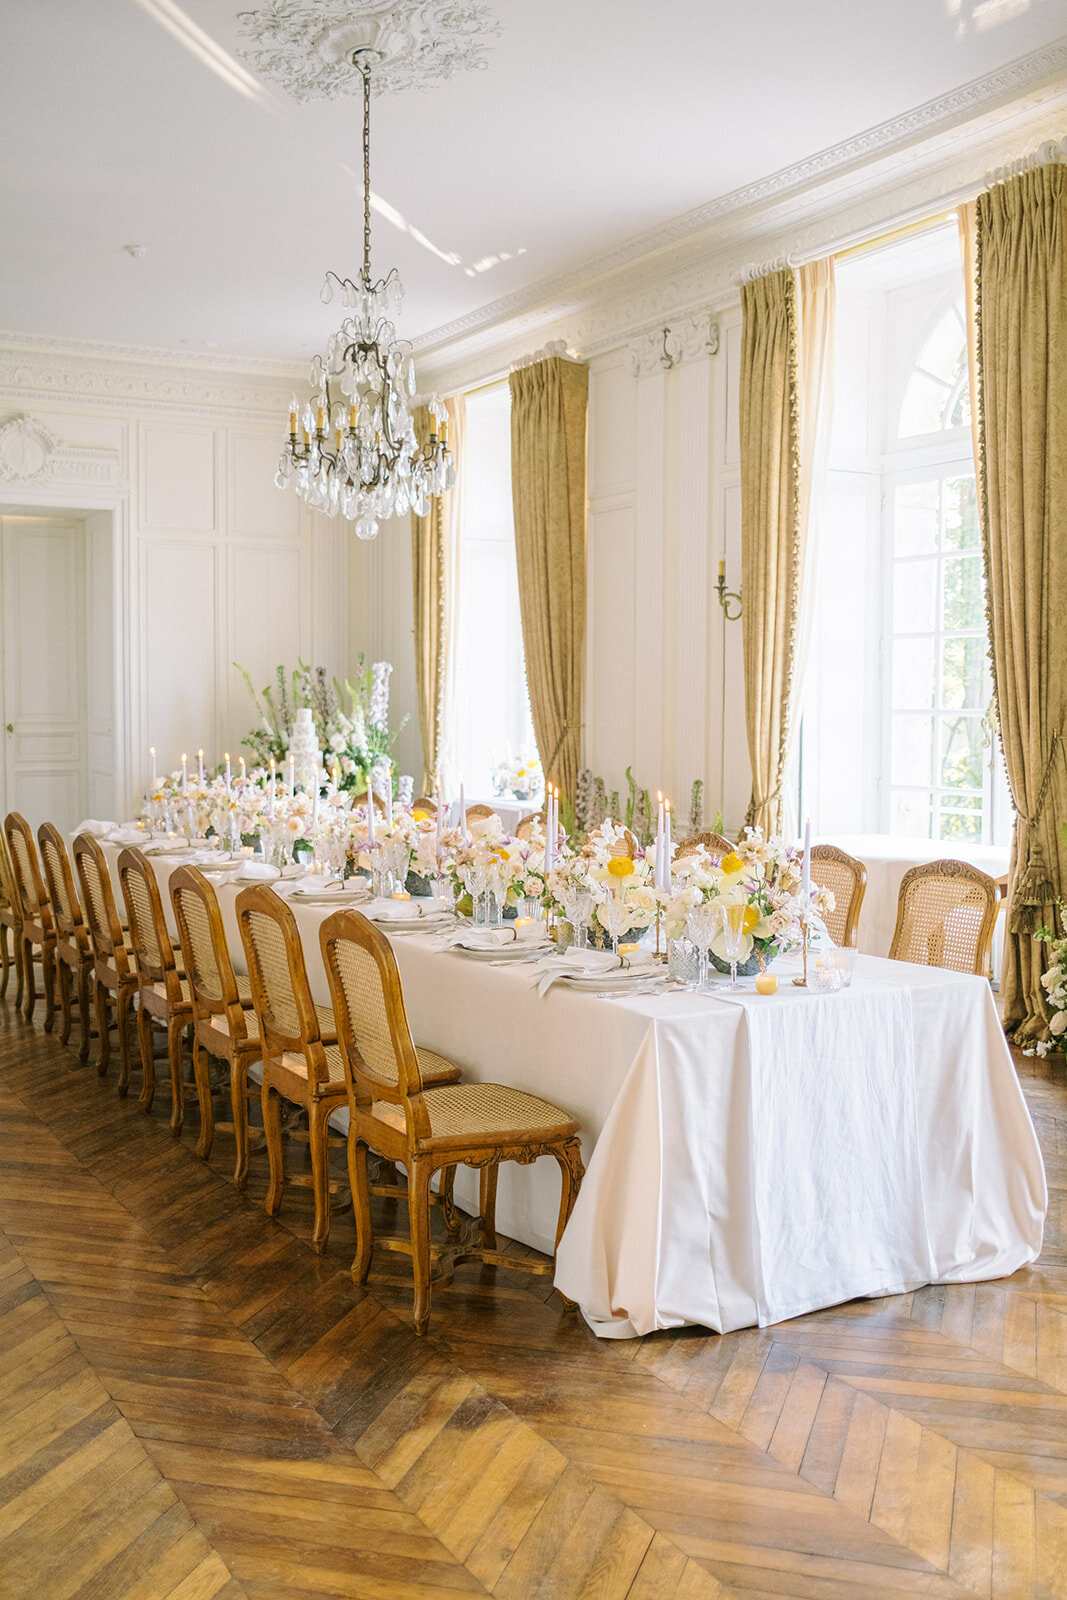 Jennifer Fox Weddings English speaking wedding planning & design agency in France crafting refined and bespoke weddings and celebrations Provence, Paris and destination A&T's Wedding - Harriette Earnshaw Photography-795